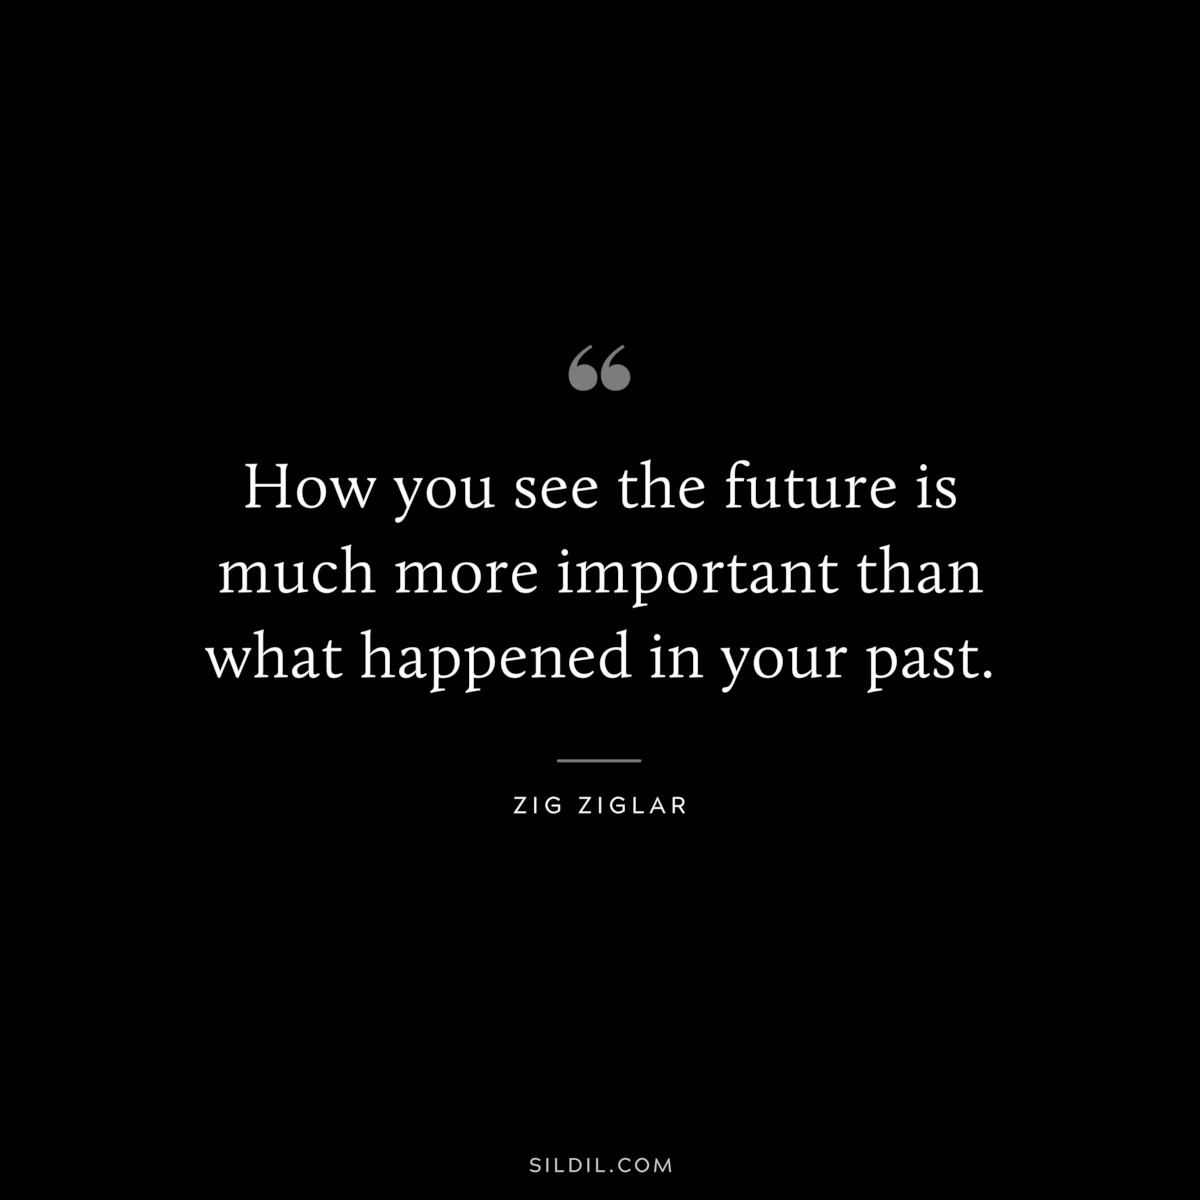 How you see the future is much more important than what happened in your past. ― Zig Ziglar